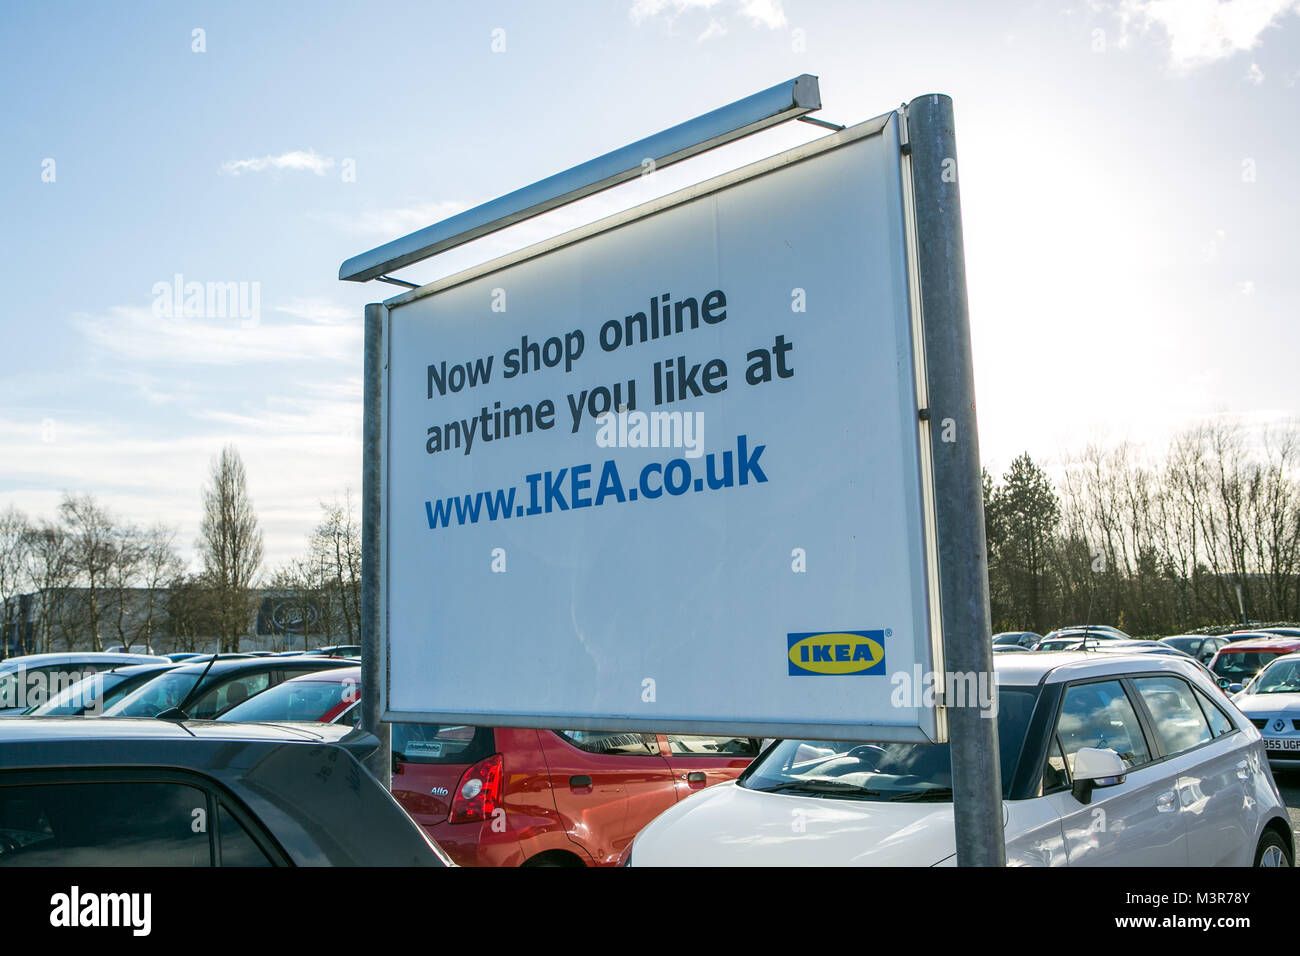 IKEA online shopping sign in a busy car park. Taken 12th February 2018 after IKEA founder Ingvar Kamprad died aged 91. Stock Photo